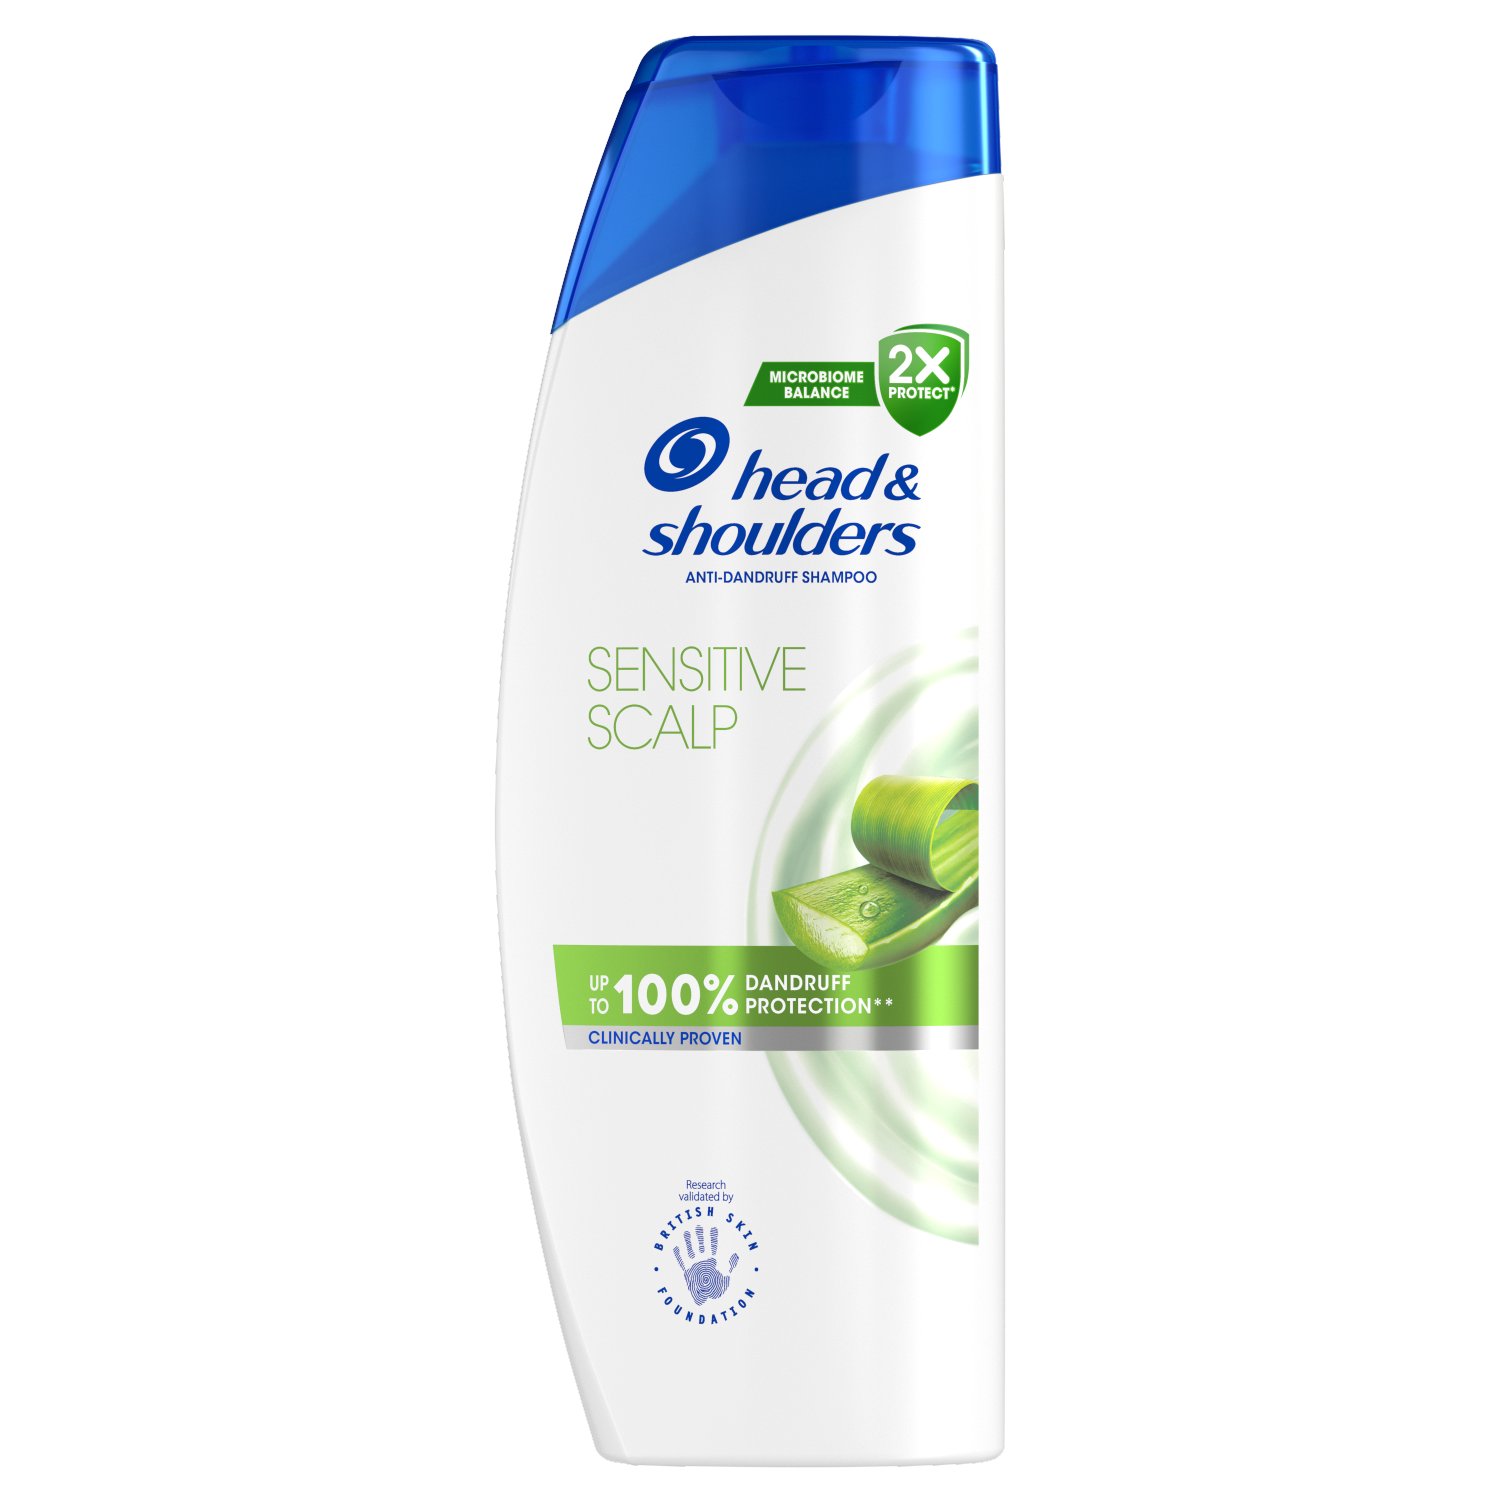 Say goodbye to dandruff with Head & Shoulders Sensitive anti-dandruff shampoo. Its Microbiome Balance formula targets the root cause of dandruff, fighting flakes (visible flakes, with regular use), itching and dryness, providing an instantly refreshing and thorough clean feeling for up to 100% dandruff protection. Its daily shampoo formula is pH balanced & boosted with vitamins and antioxidants. Dermatologically tested and clinically proven to be effective, while gentle enough to be suitable for daily use. The bottle is made of 100% recycled plastic (excluding cap, colourants & additives) and is recyclable (excluding cap, colourants & additives). When used with Head & Shoulders Conditioner it increases the dandruff protection on your scalp for soft and beautiful flake-free hair (visible flakes, with regular use).